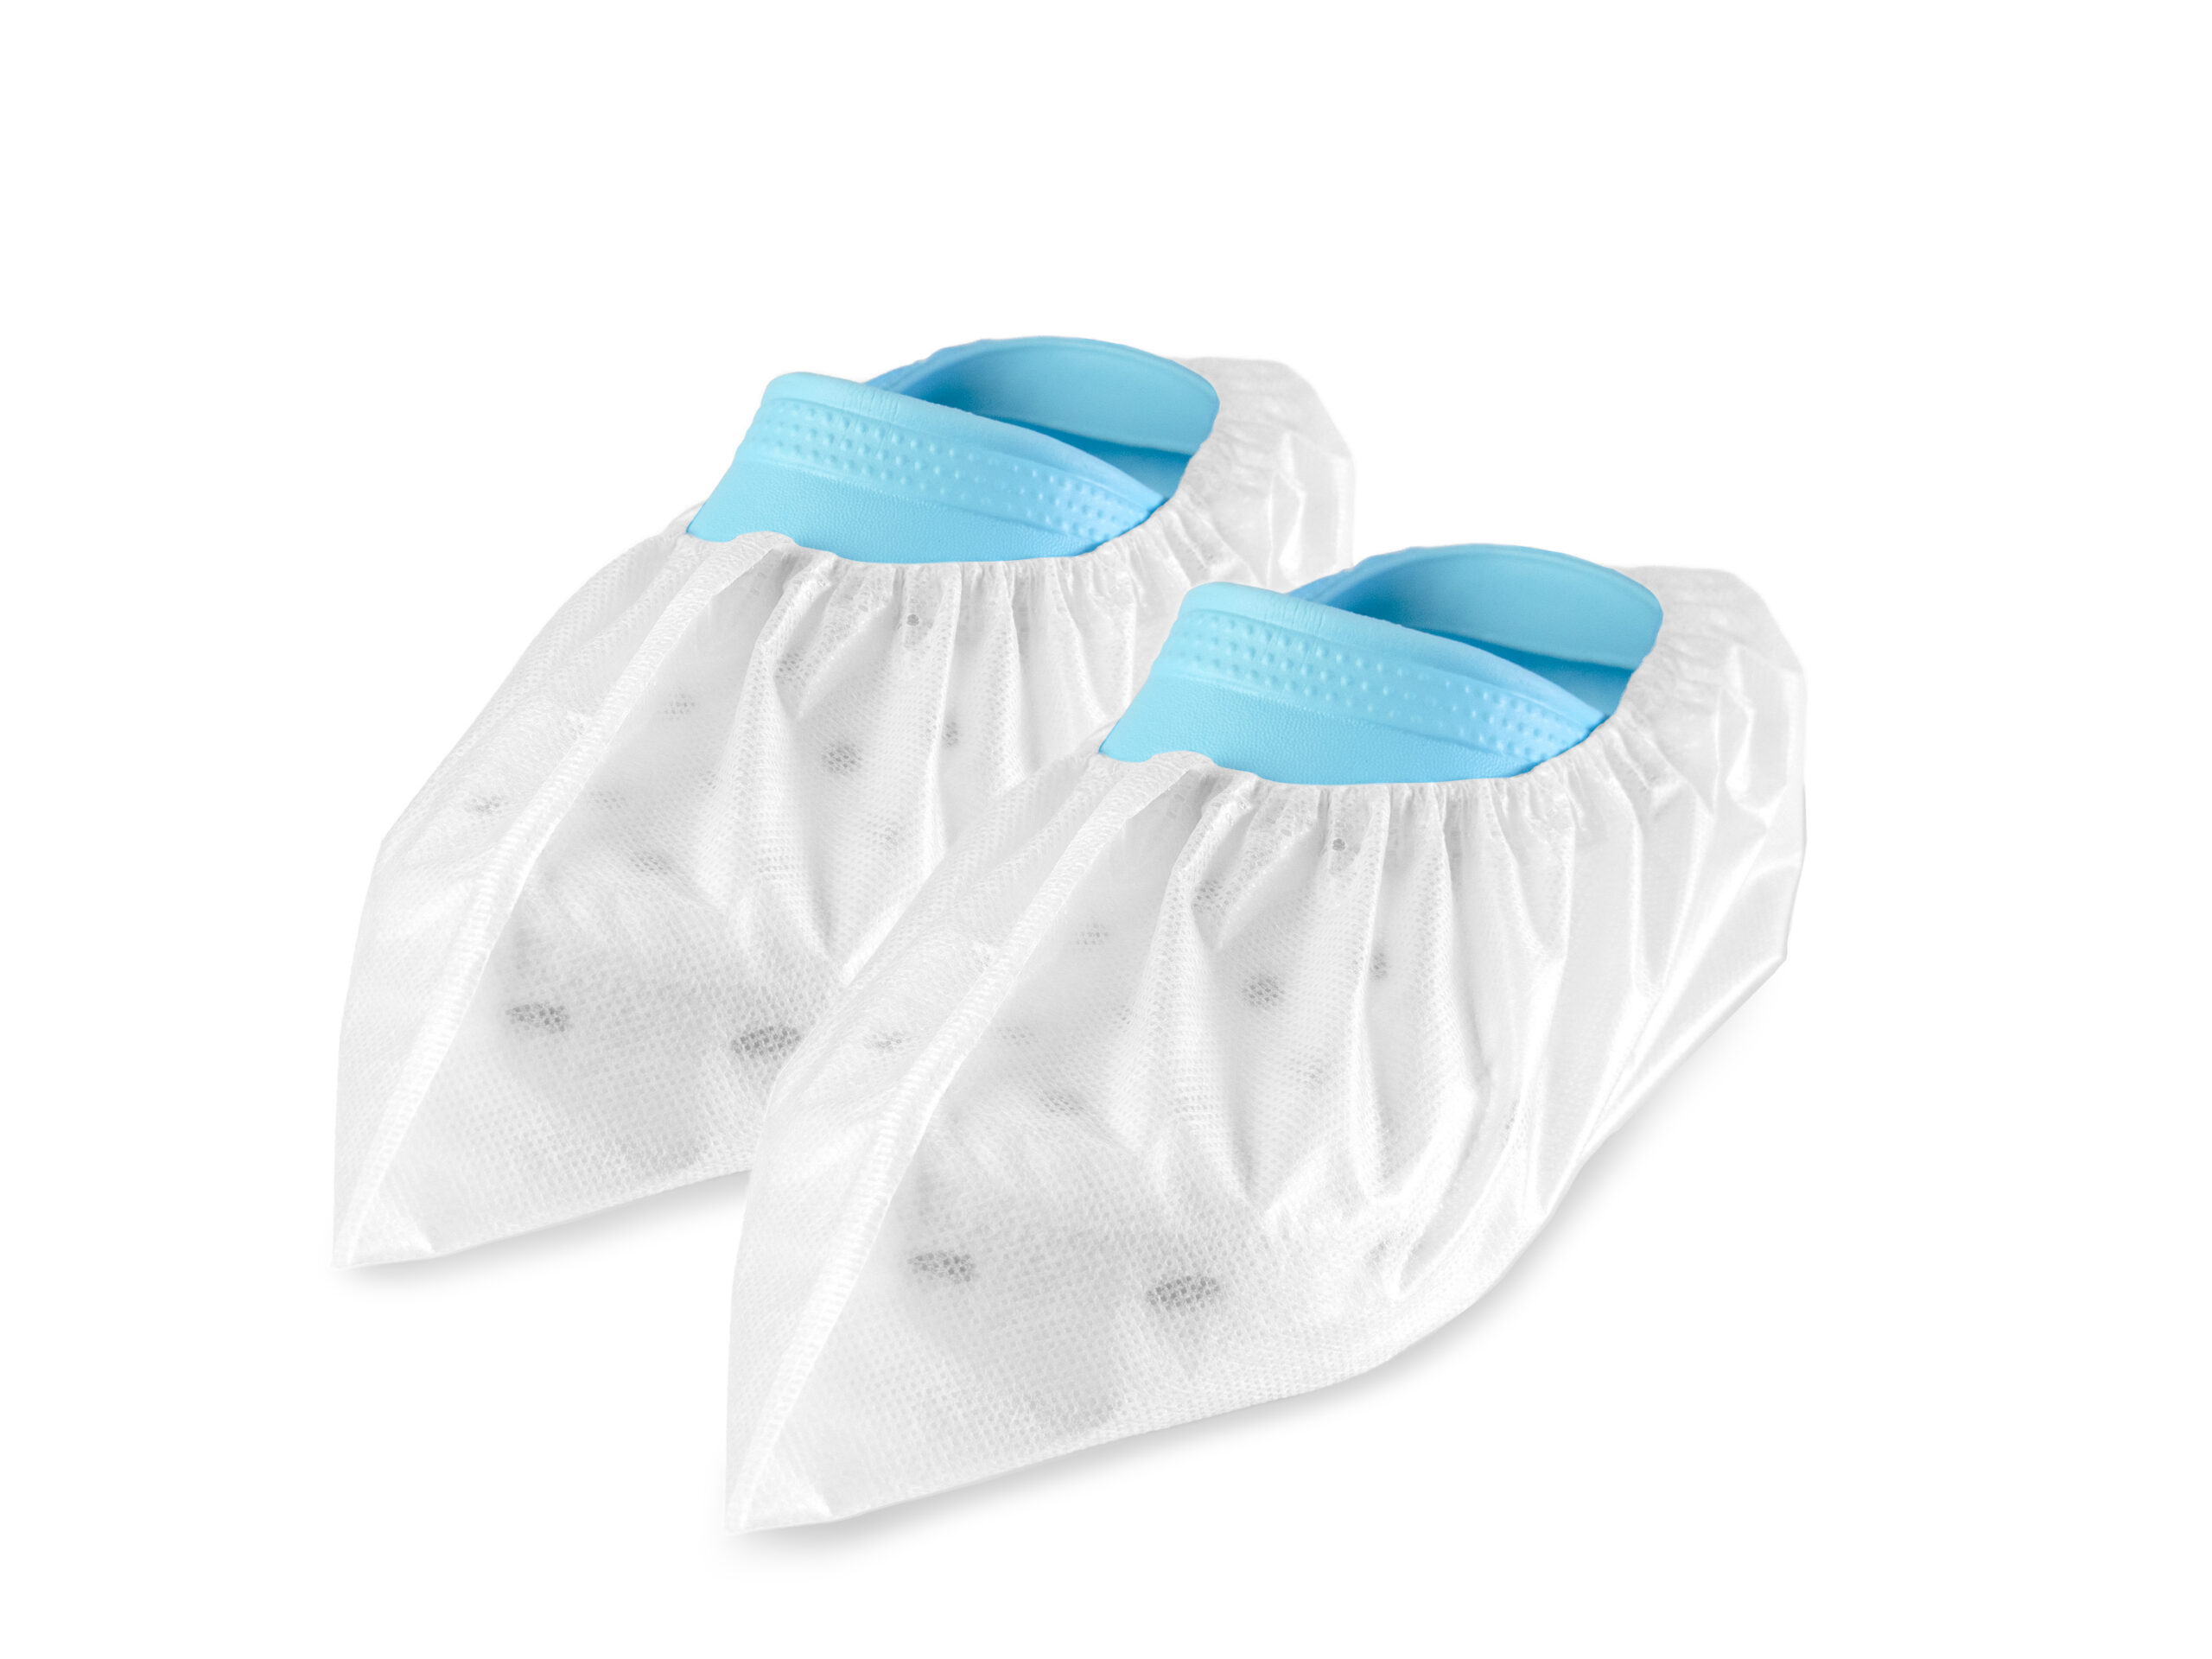 Couvre-chaussures jetables ShoozCovers Tough Line - Surgmed Group